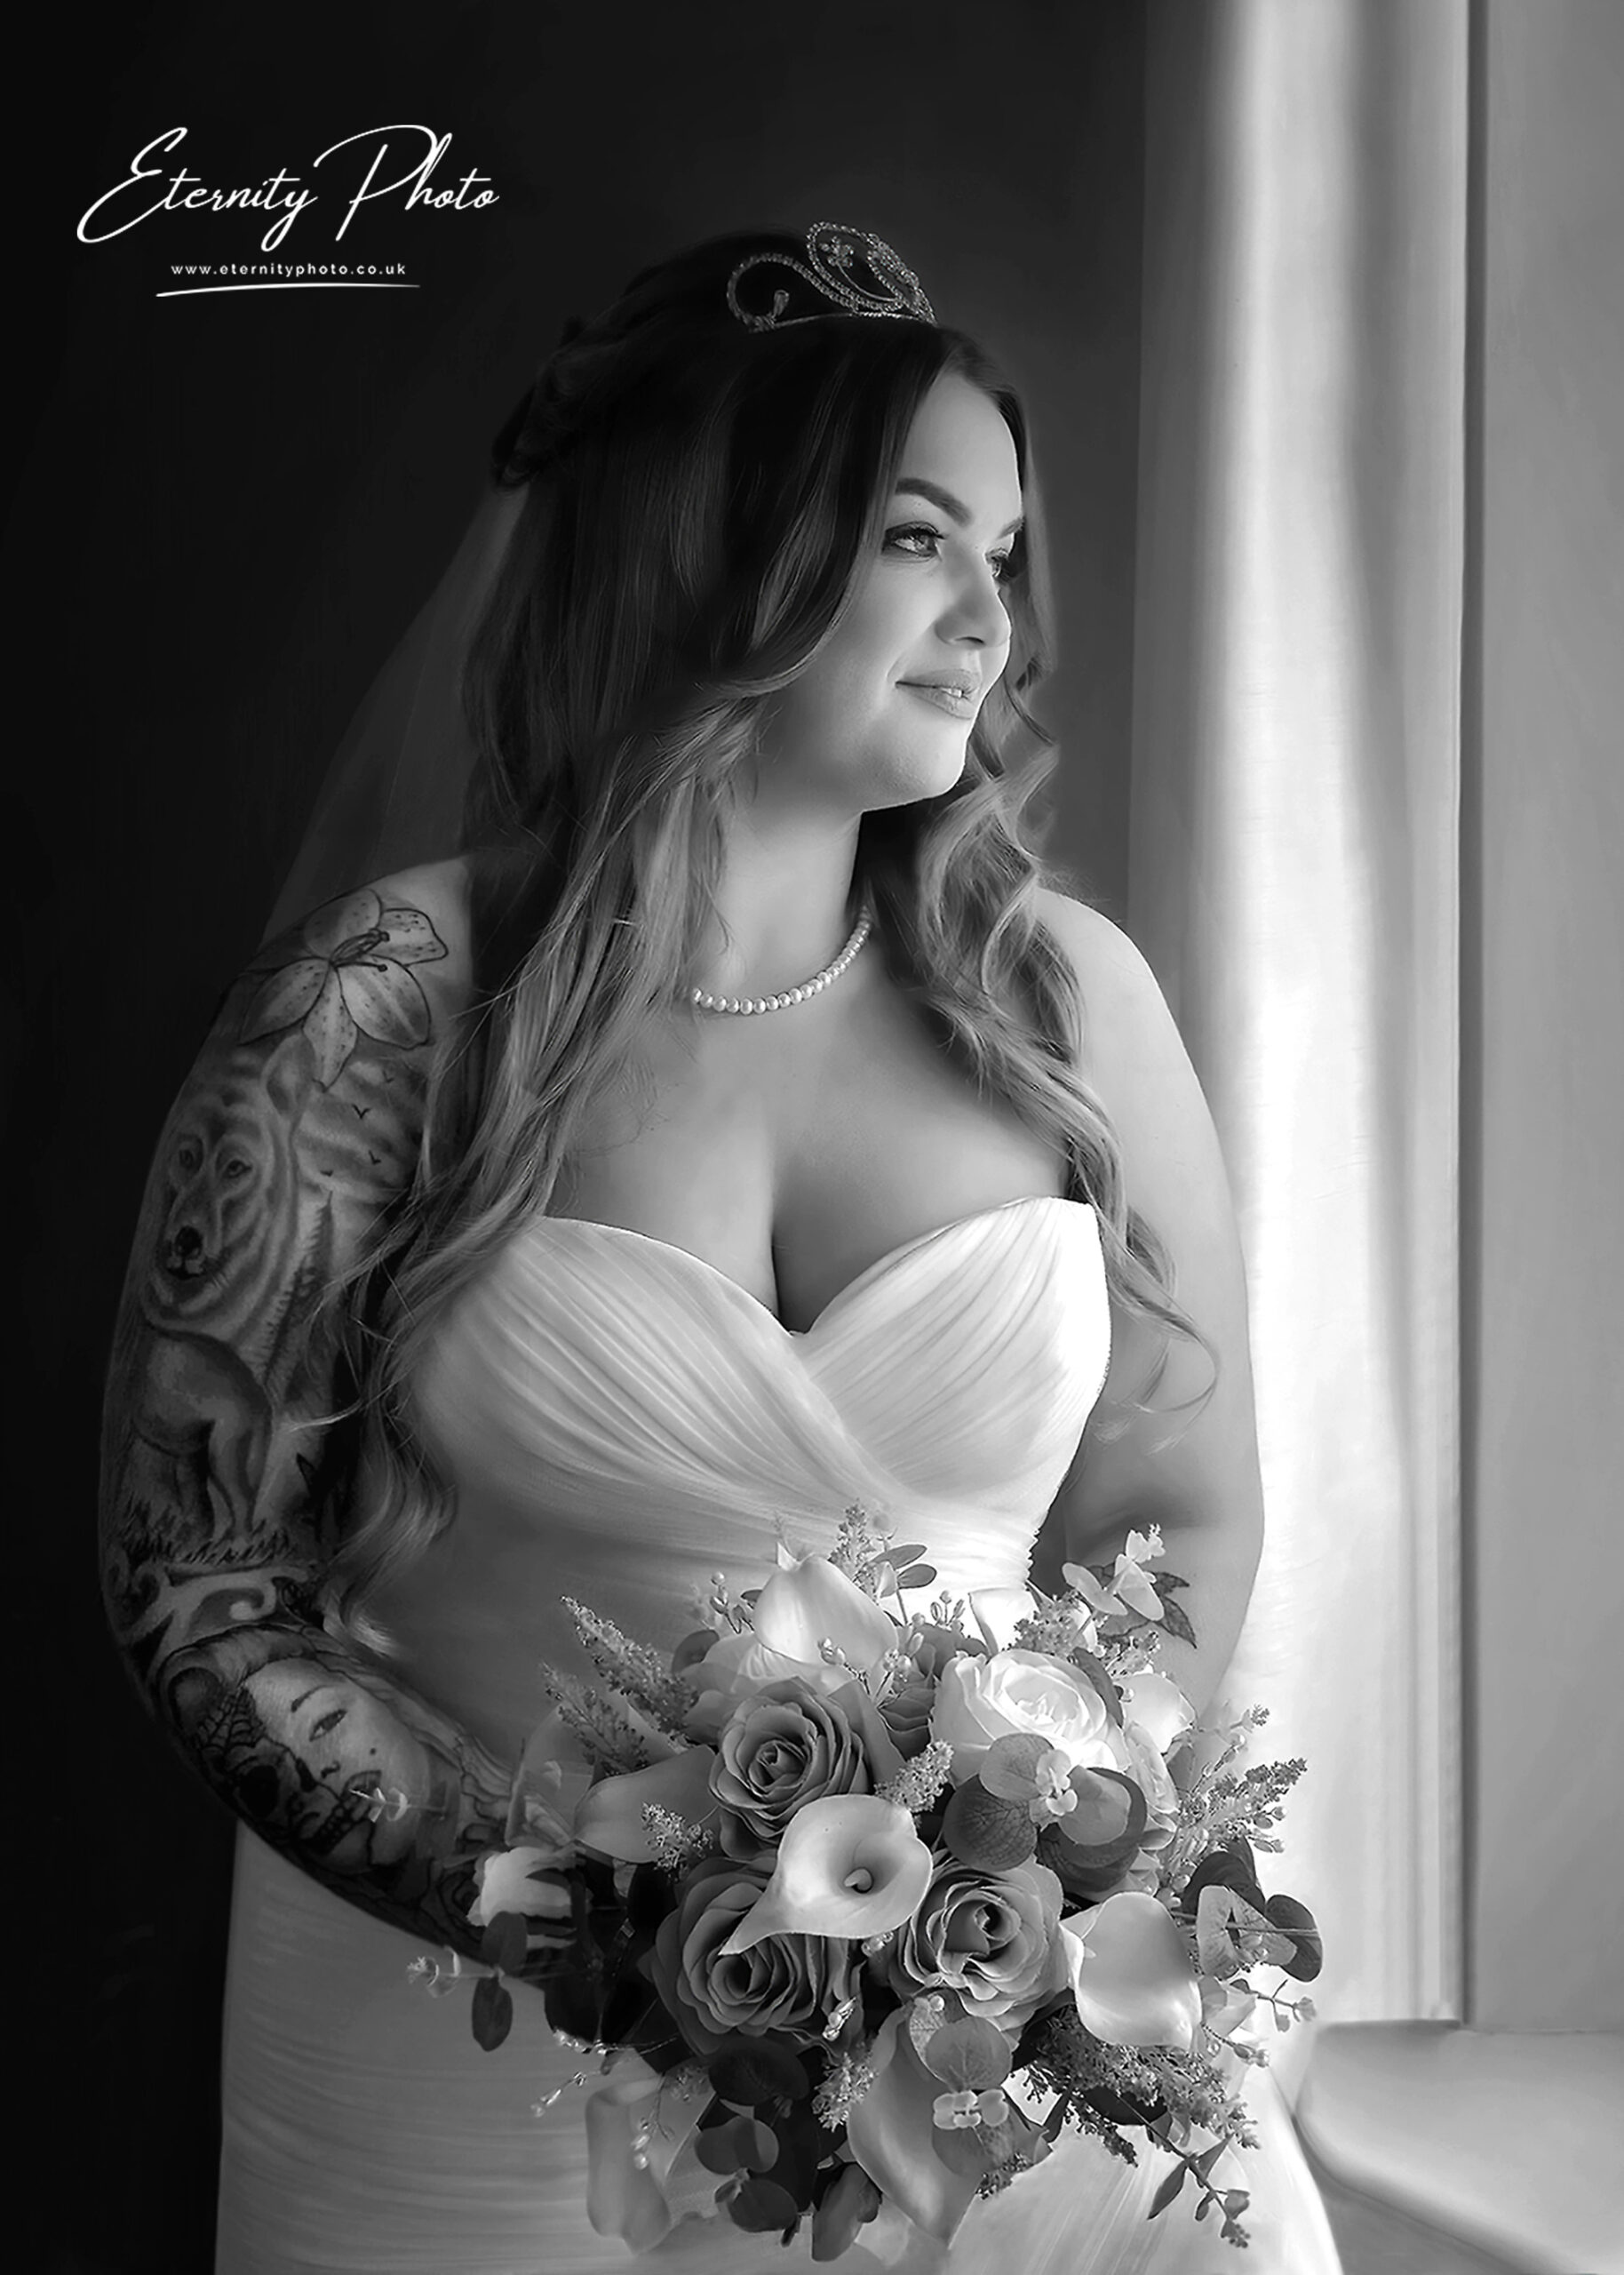 Tattooed bride in white gown holding bouquet, black and white.